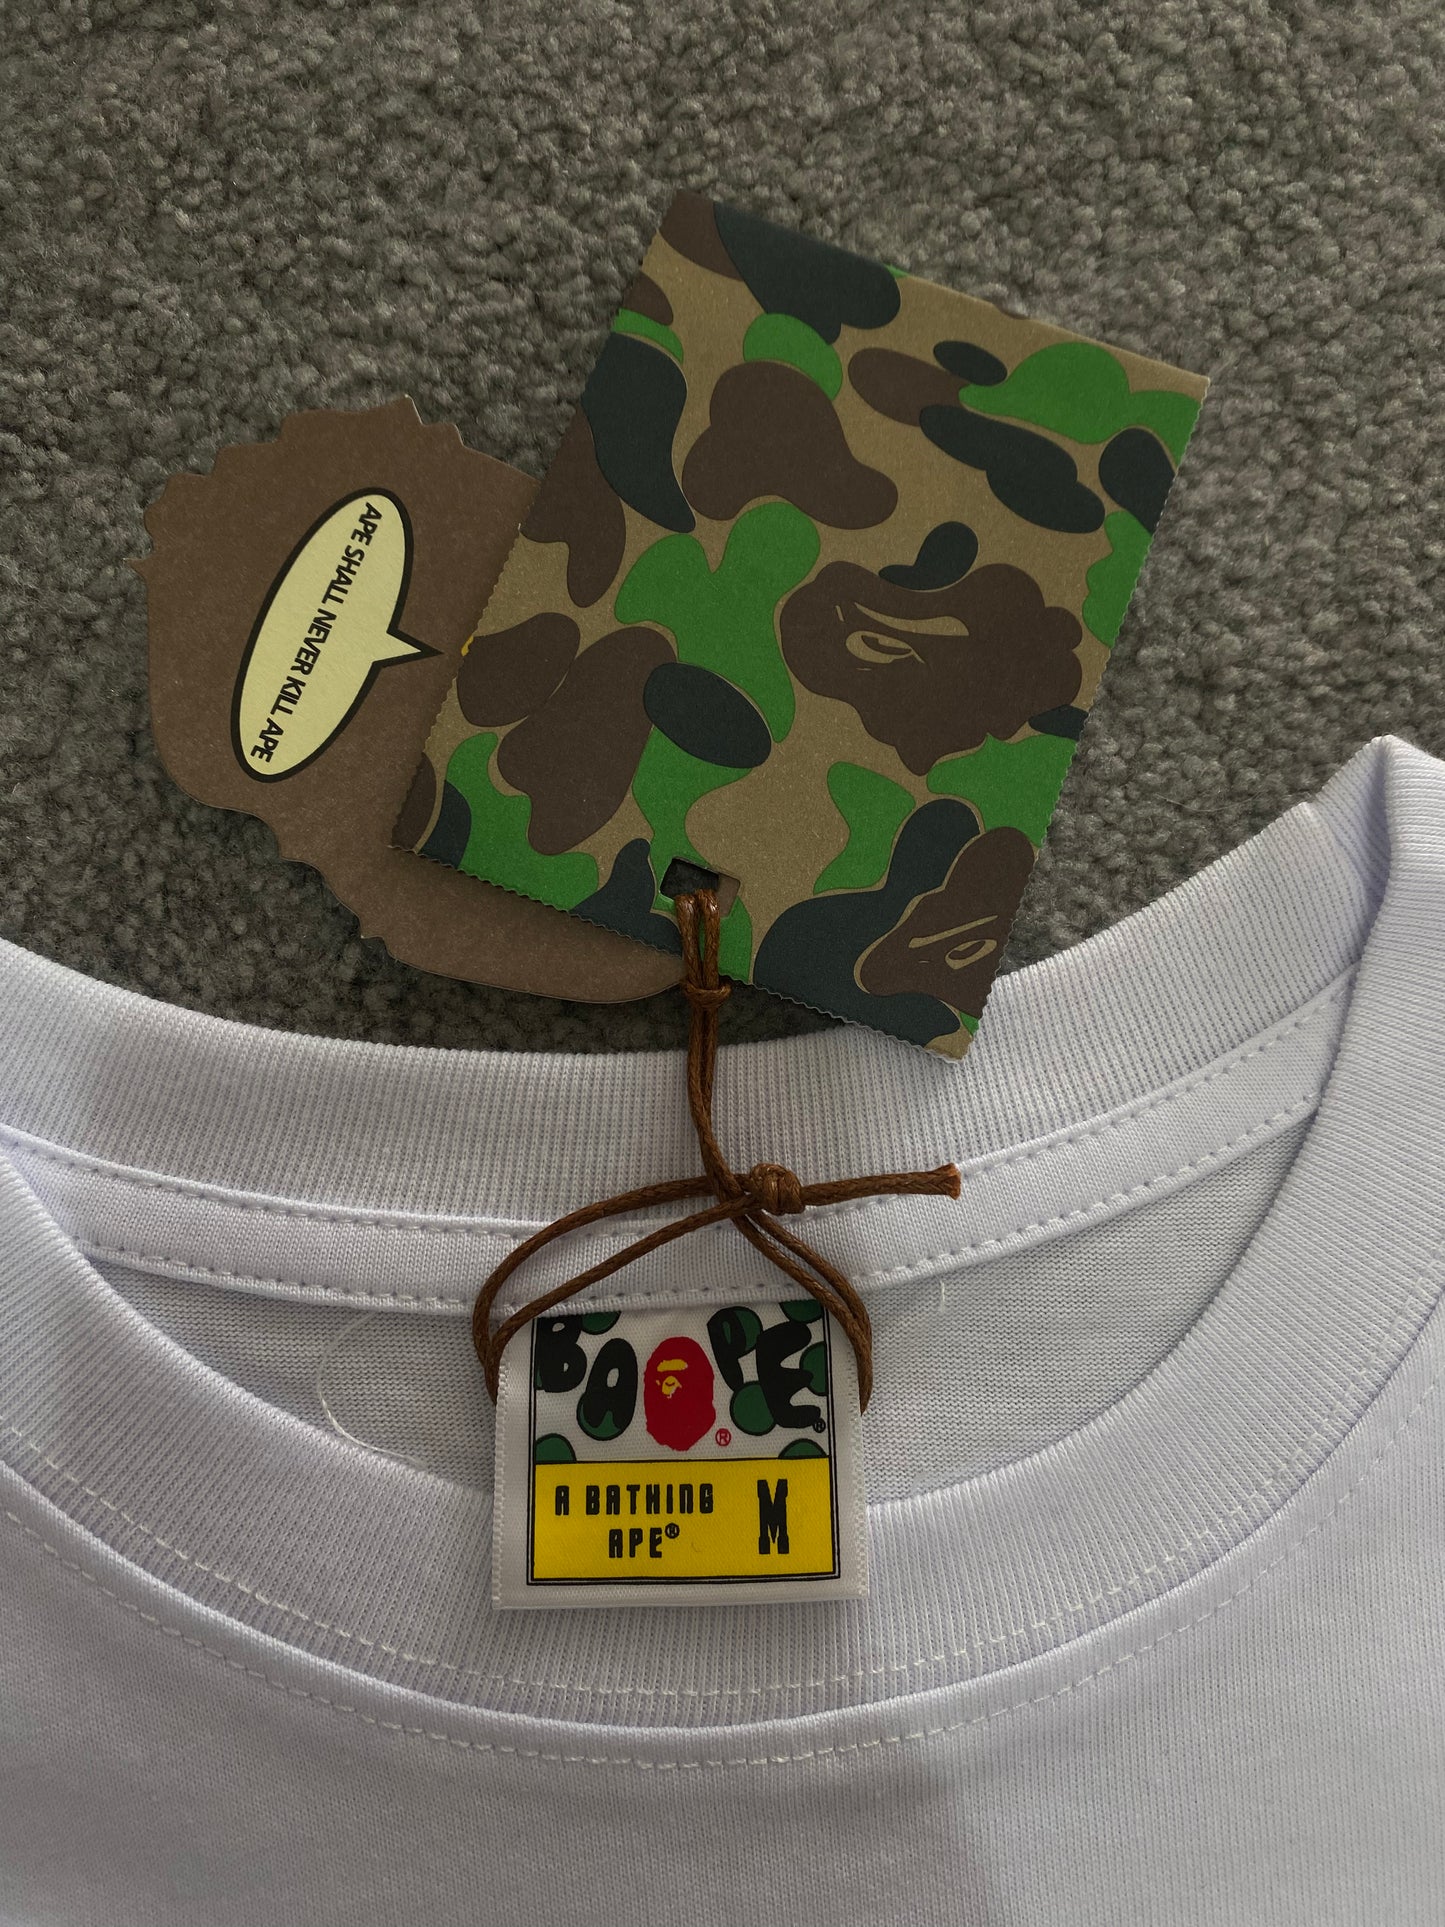 BAPE Space Camo By Bathing White Tee - Icy Clothes Ro